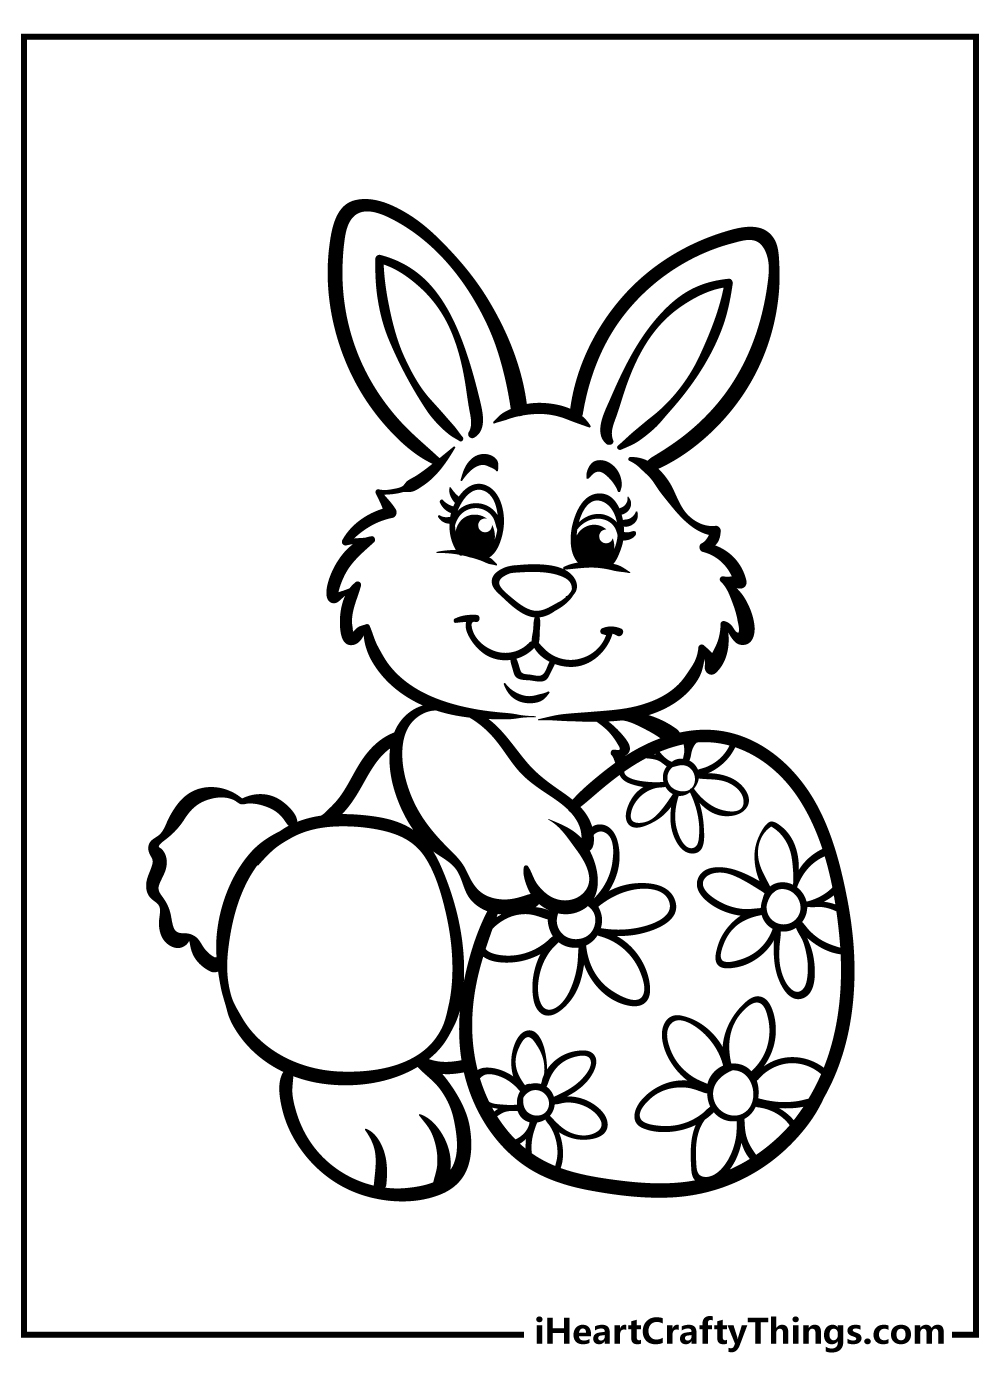 Easter Bunny Coloring Pages 100 Free Printables - Free Printable Bunny Pictures